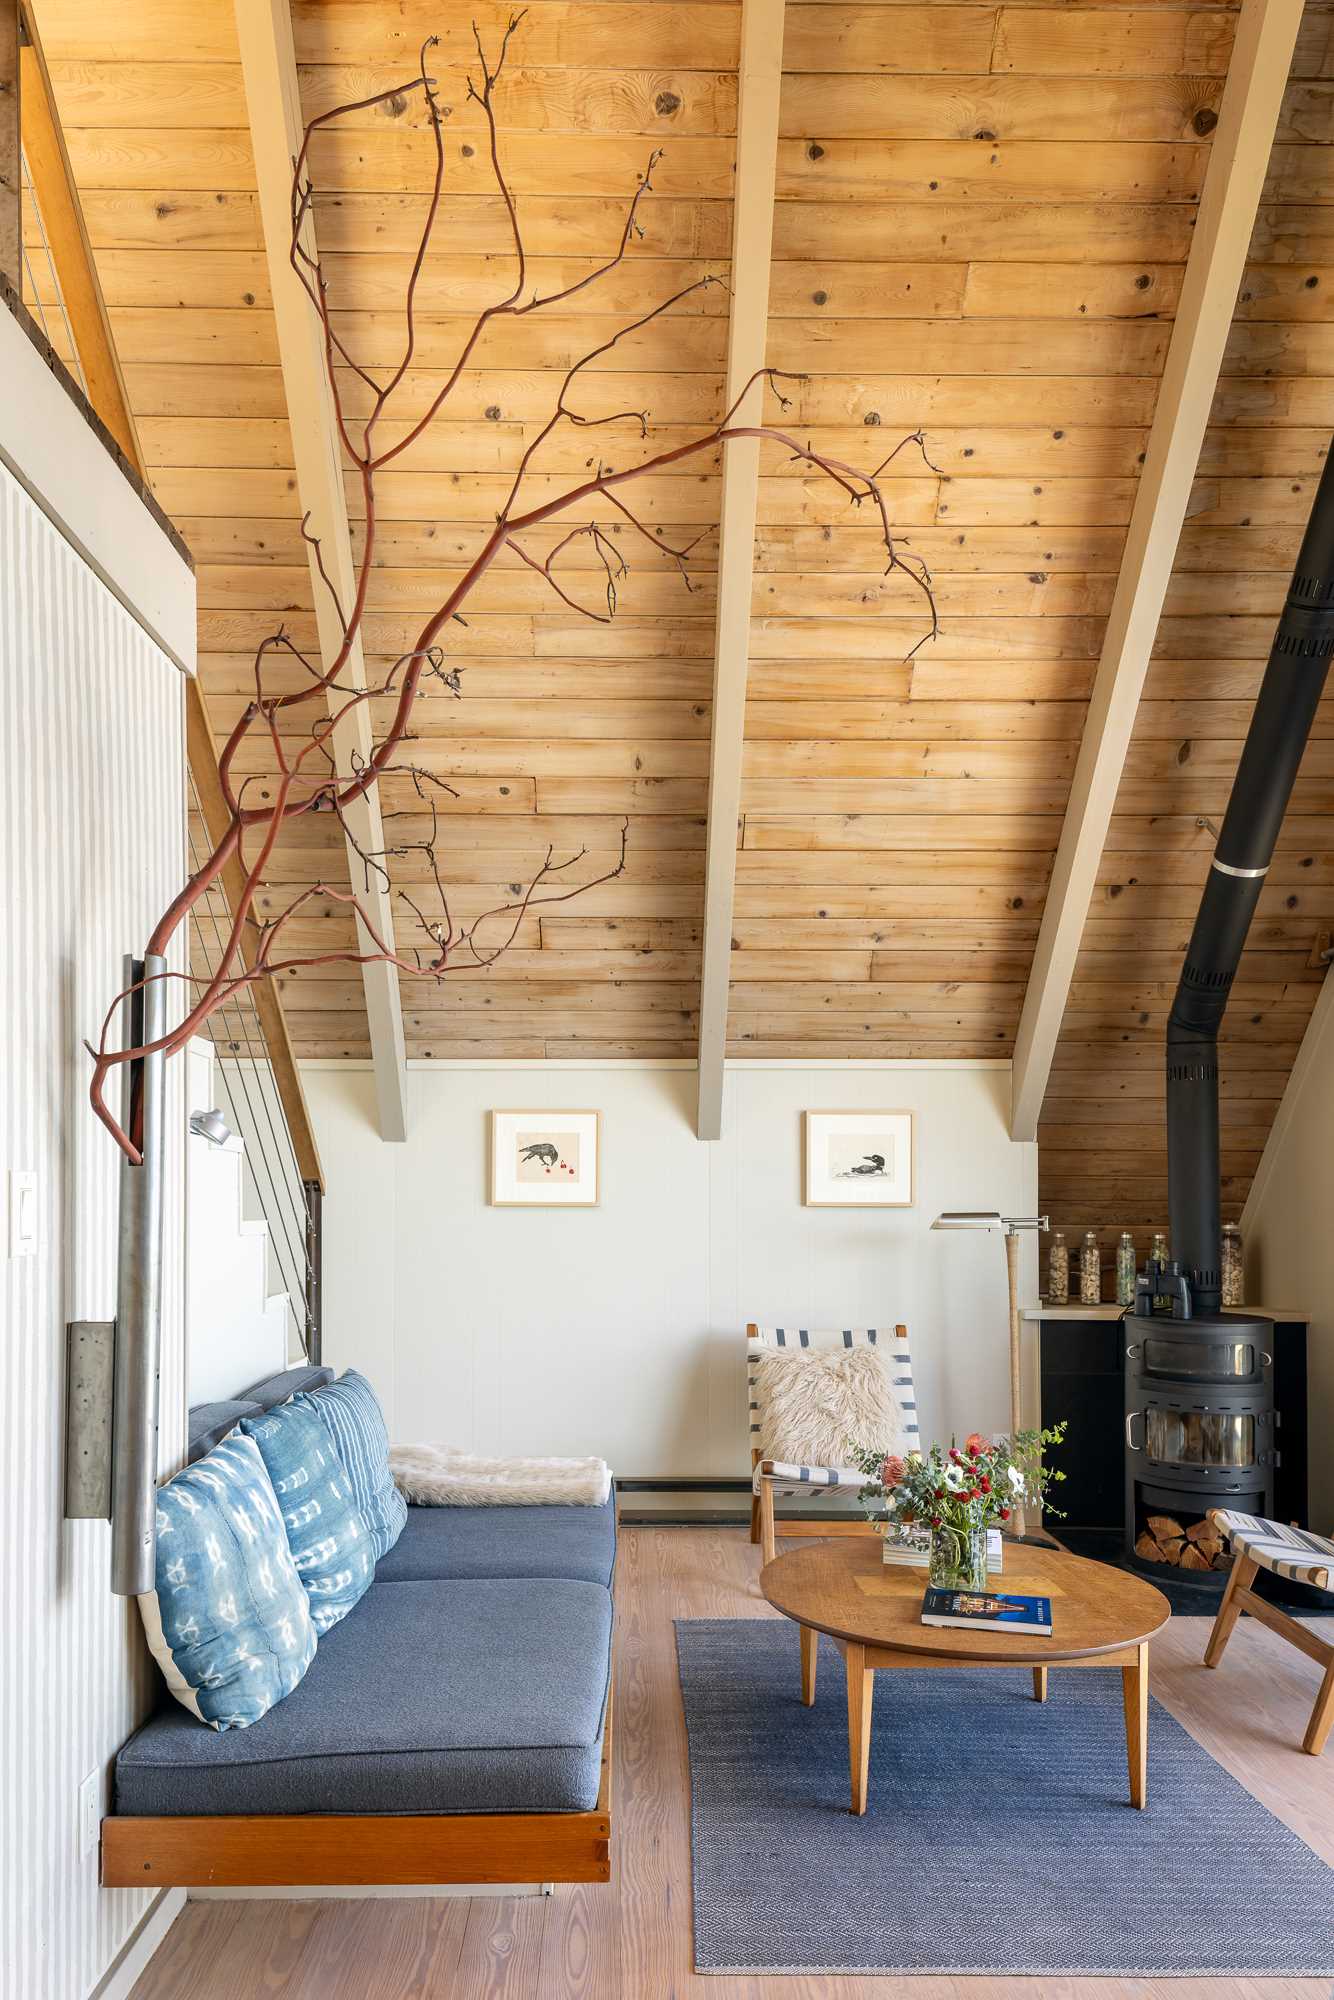 In this renovated A-frame home, reclaimed pine has been used for the flooring and the original exposed fir structure is finished with wood bleach, while the beams are painted to cover an original coffee-brown stain.